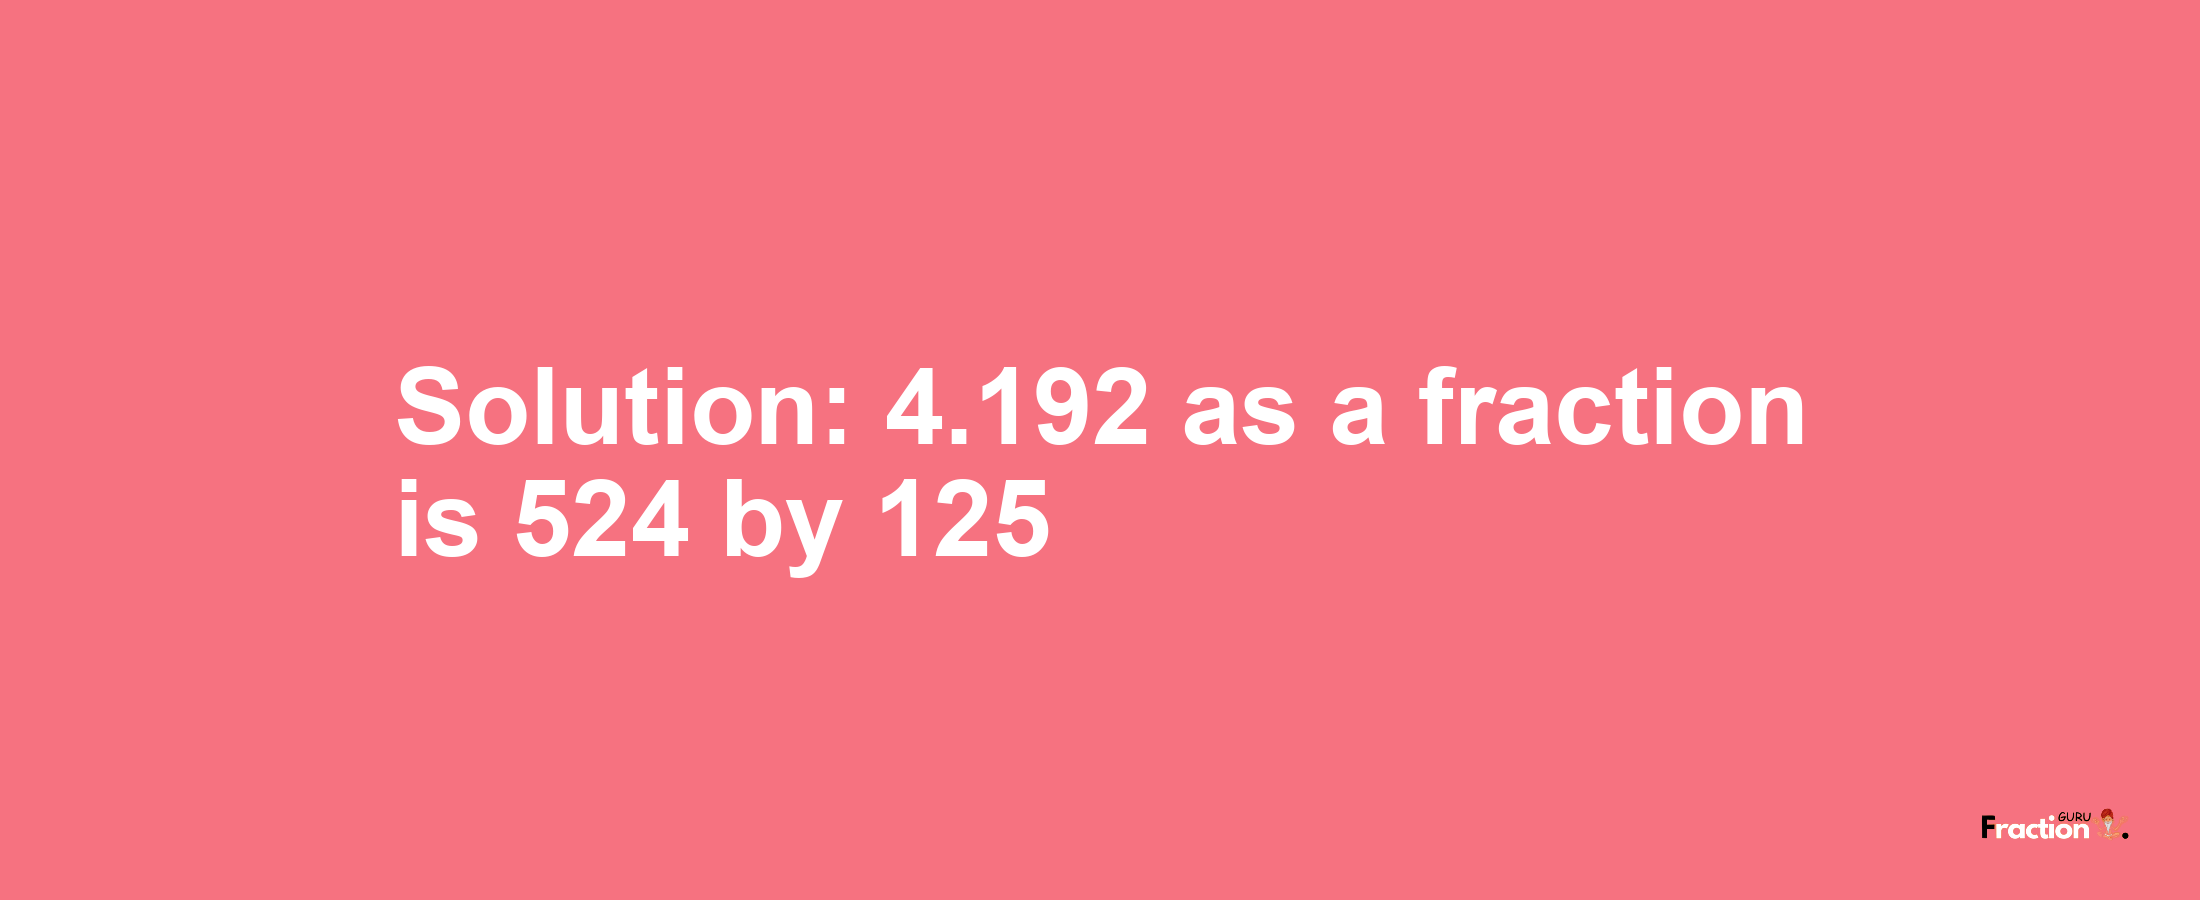 Solution:4.192 as a fraction is 524/125